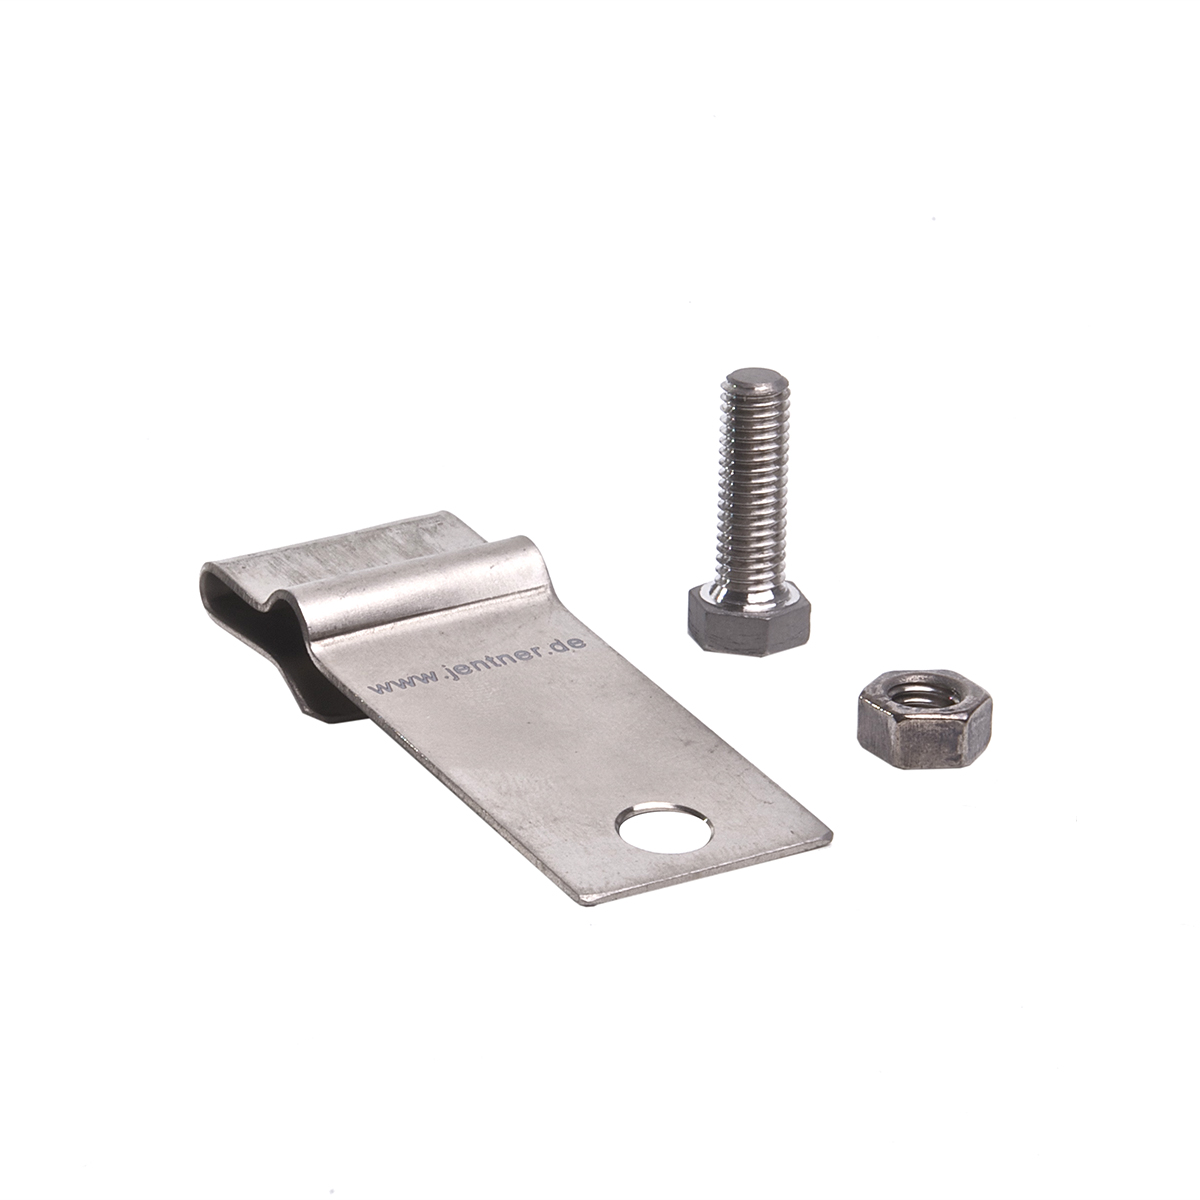 Titanium-fixation for anodes 80x20 mm with screws